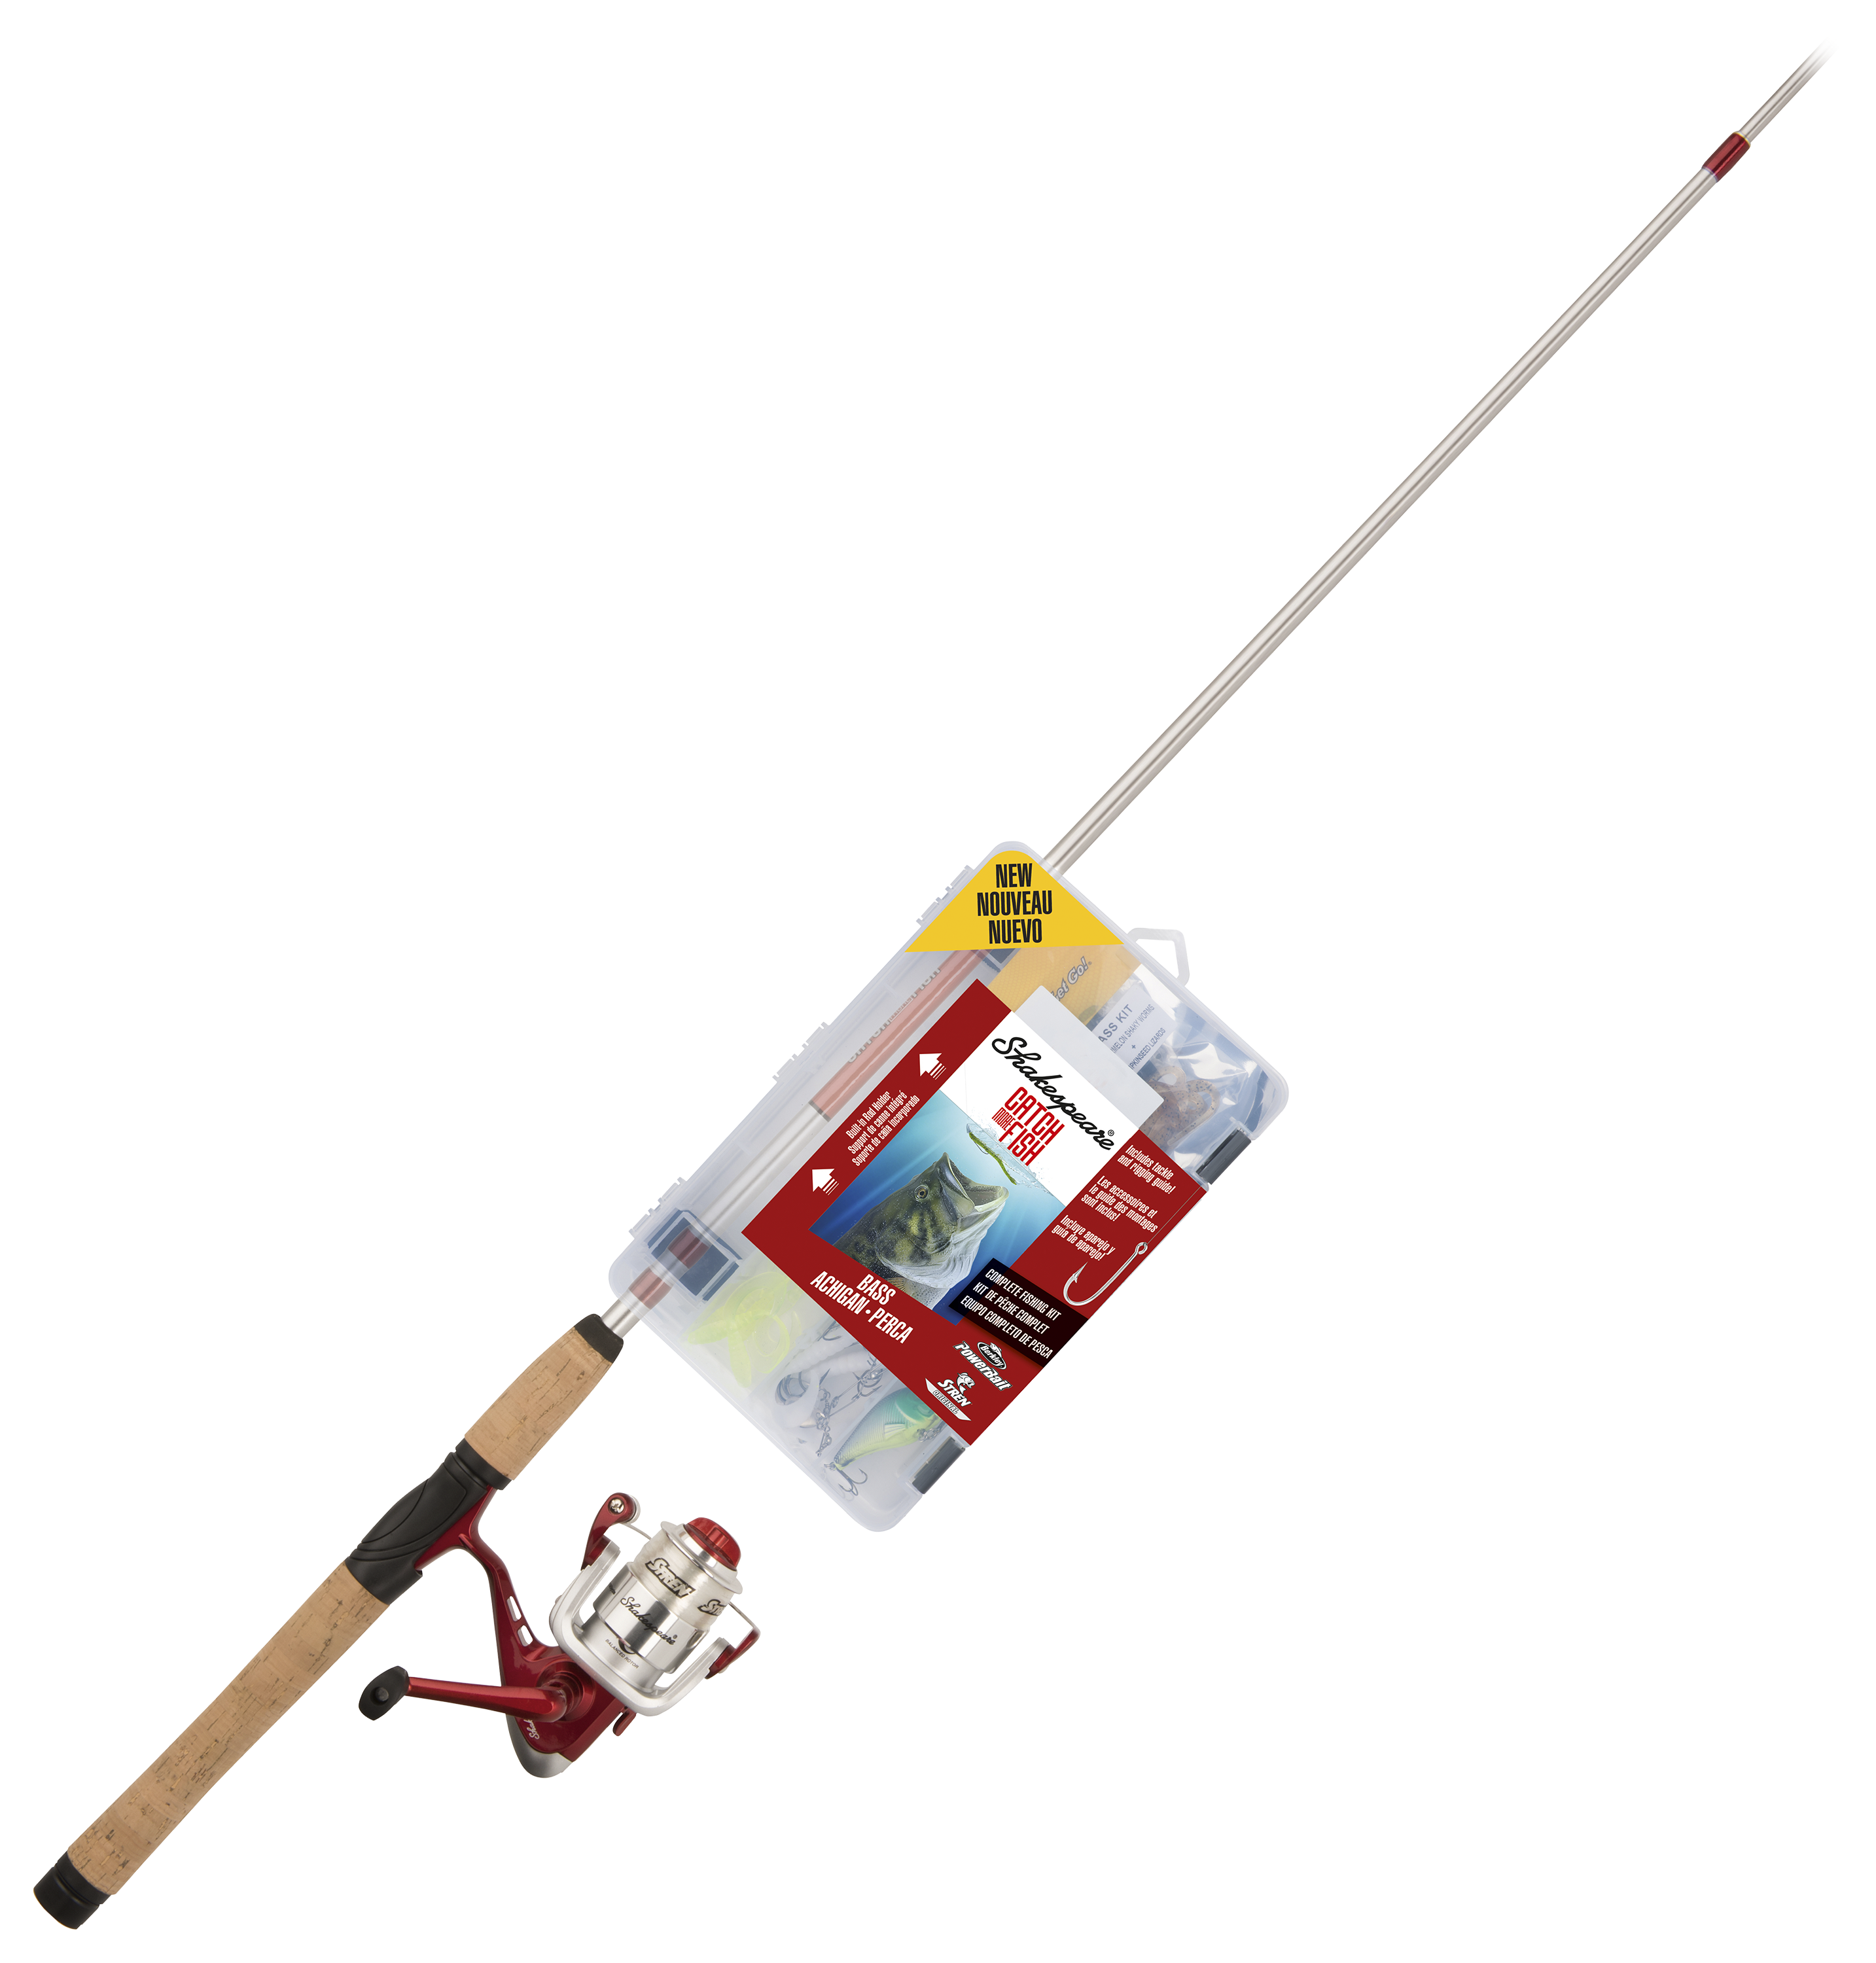 Shakespeare Catch More Fish Spinning Fishing Rod and Reel Combo